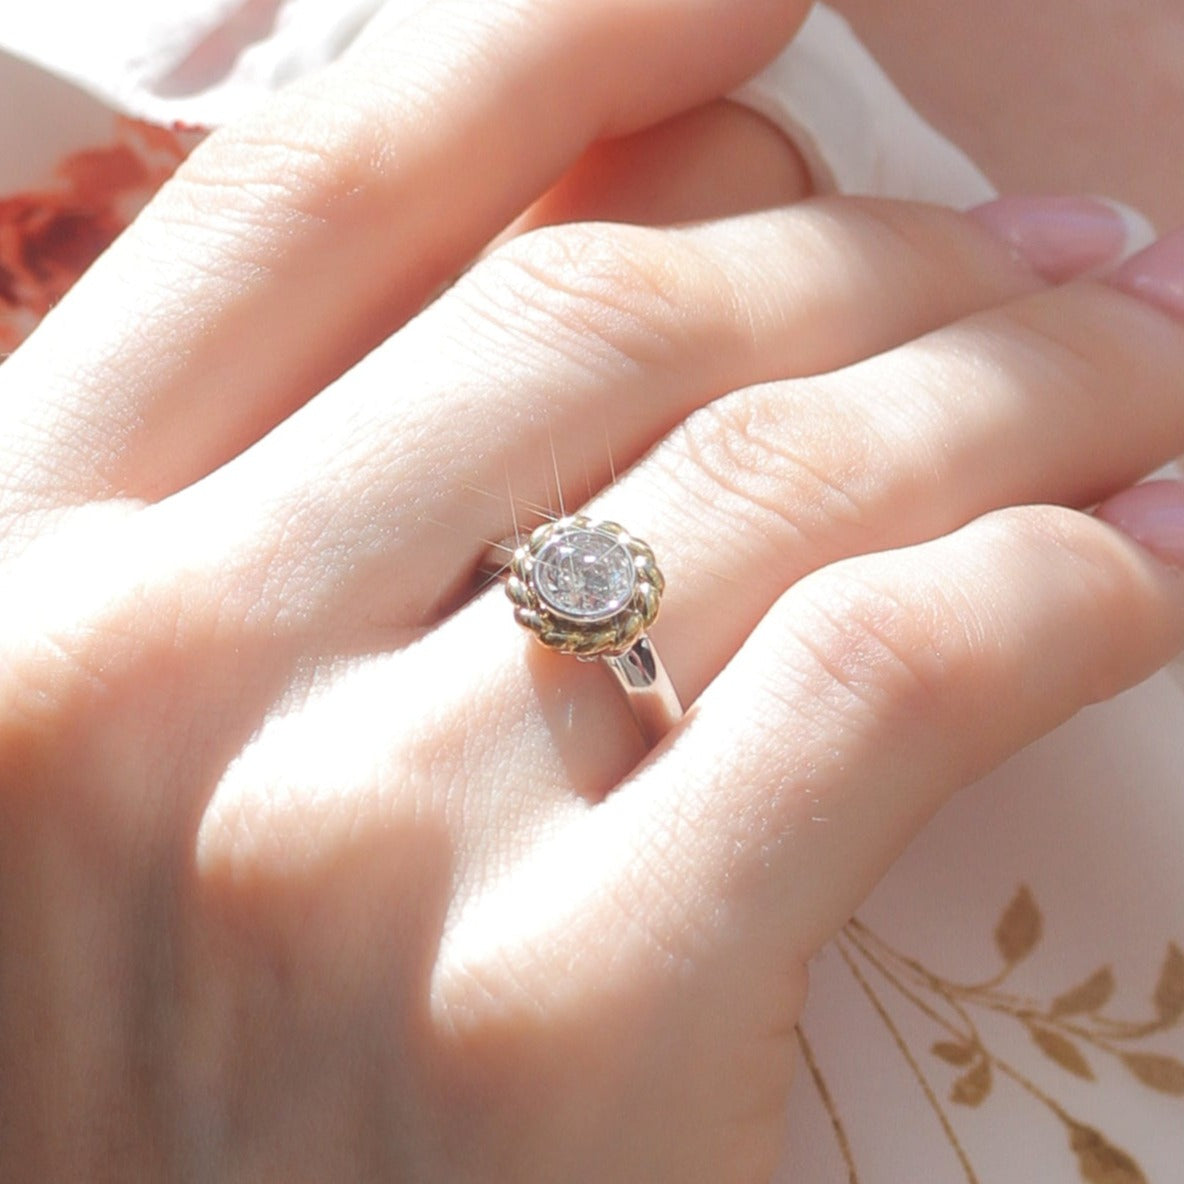 The Celestial Bloom Solitaire Ring